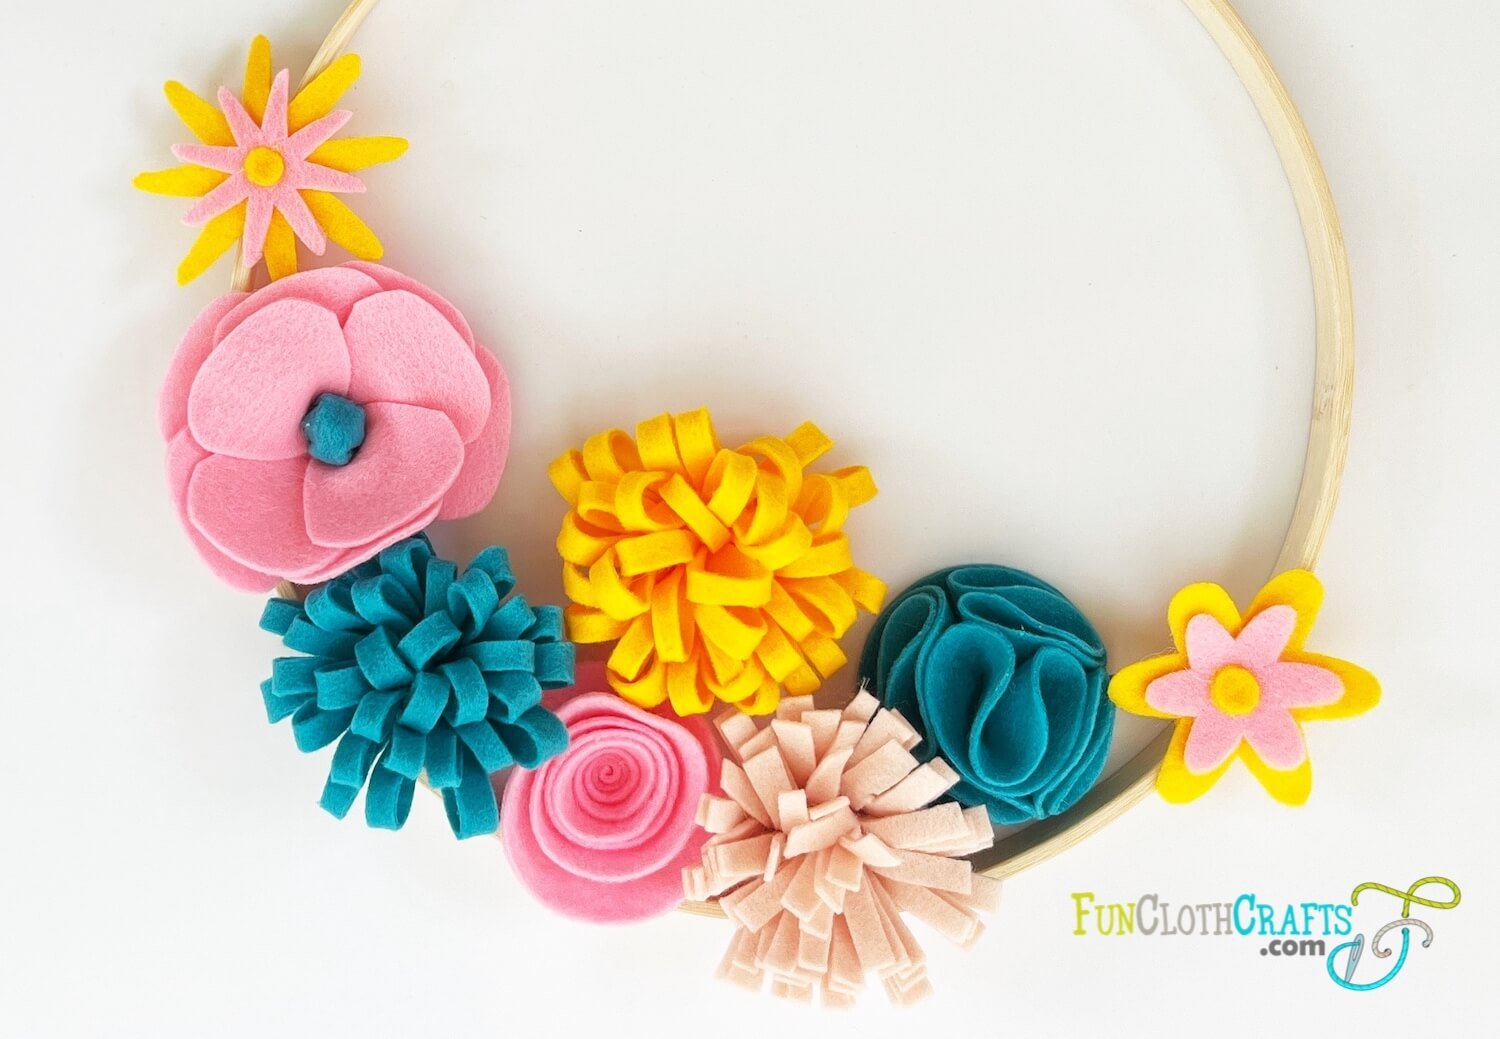 Felt Flower Embellishments for Crafts - Red White and Blue Flowers